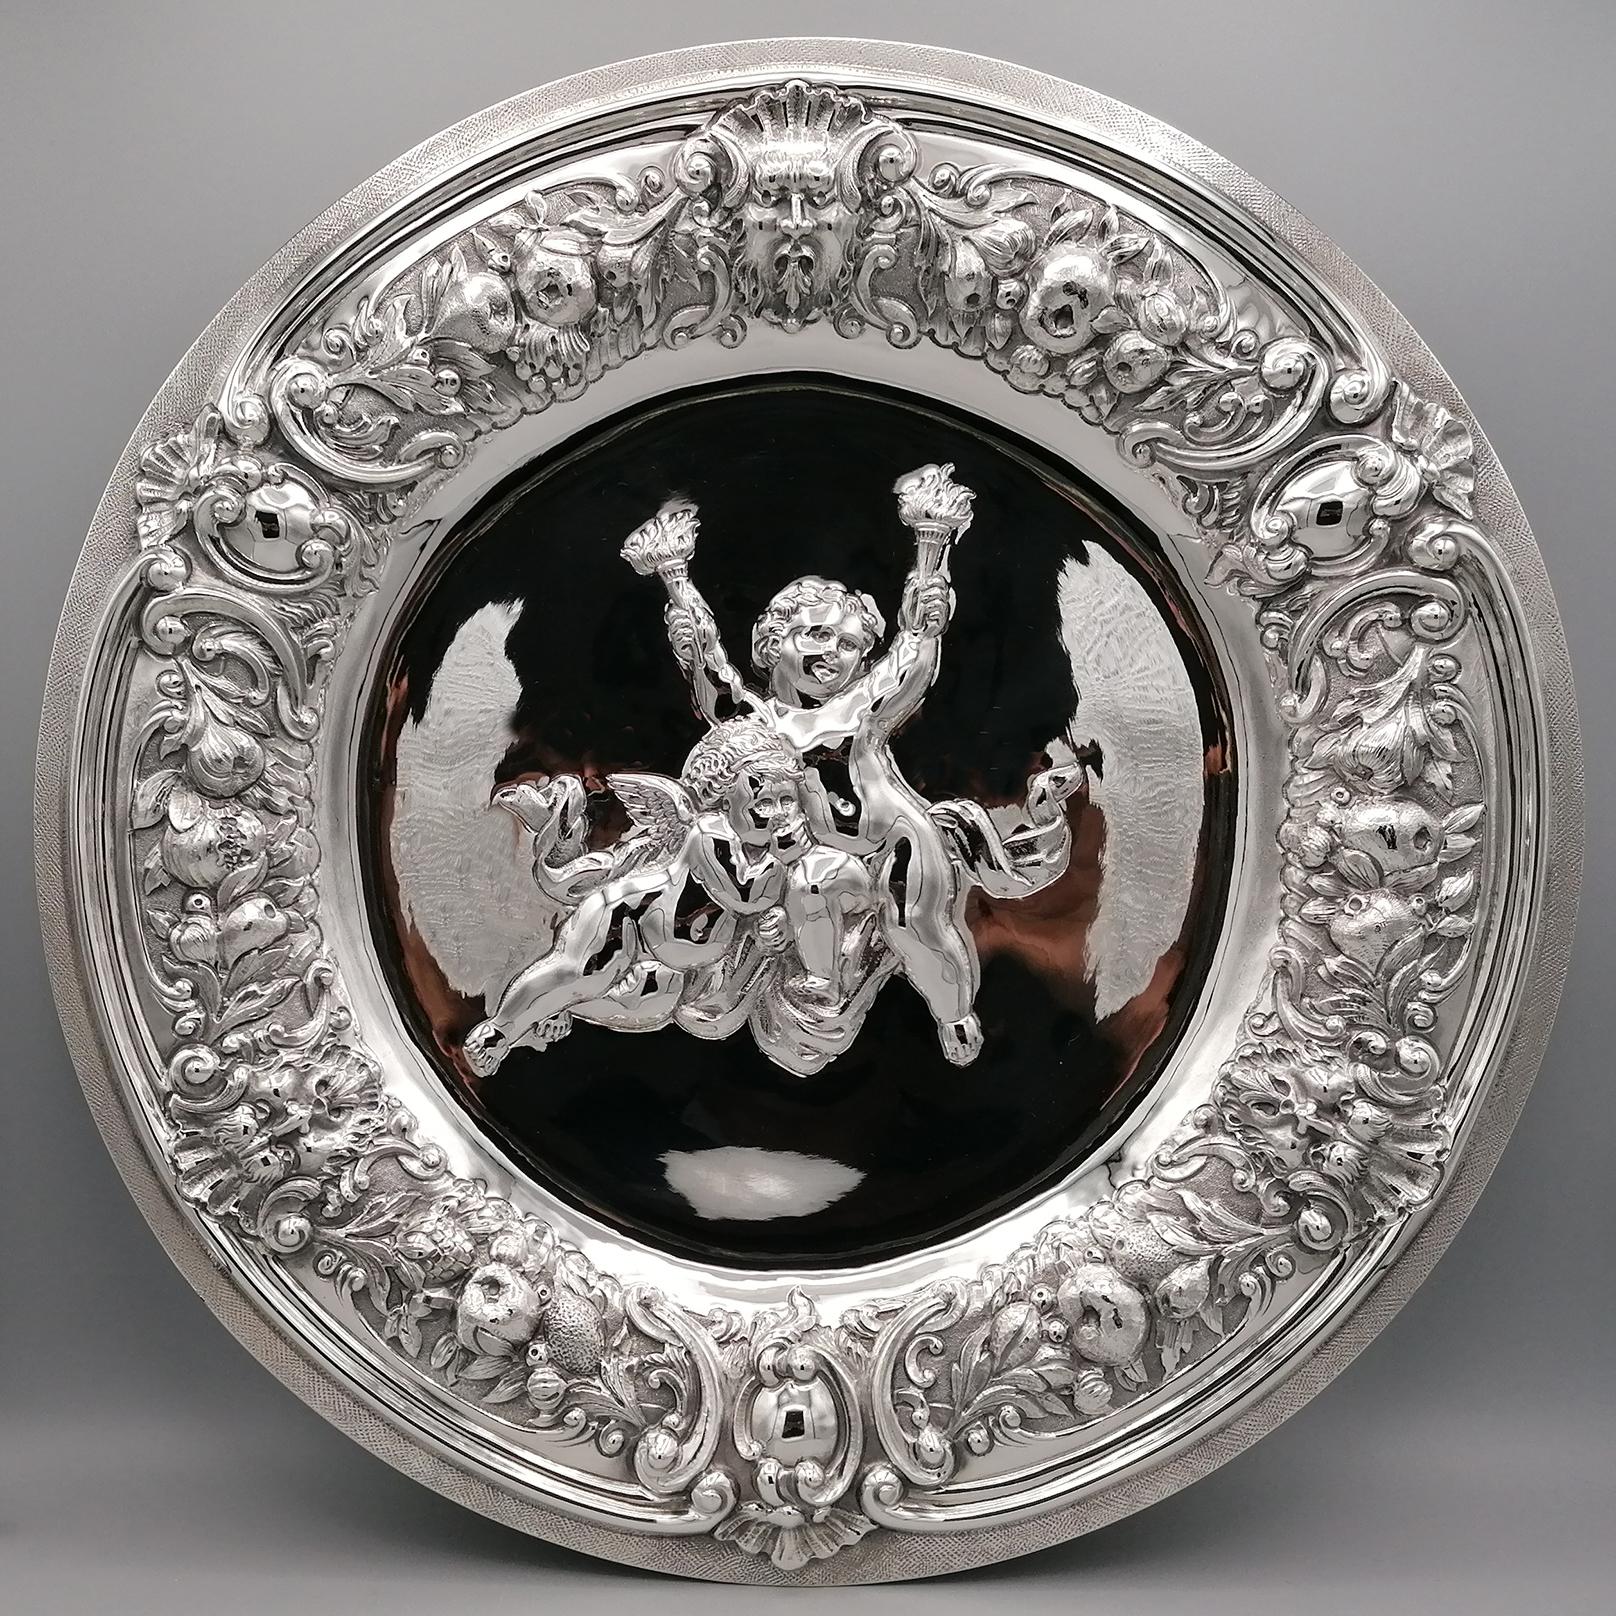 Baroque style centerpiece in solid 800 silver, completely handmade and subsequently embossed and chiseled.
The edge of the centerpiece was embossed with fruit motifs and masks, typical of the Baroque period.
The outermost edge has been